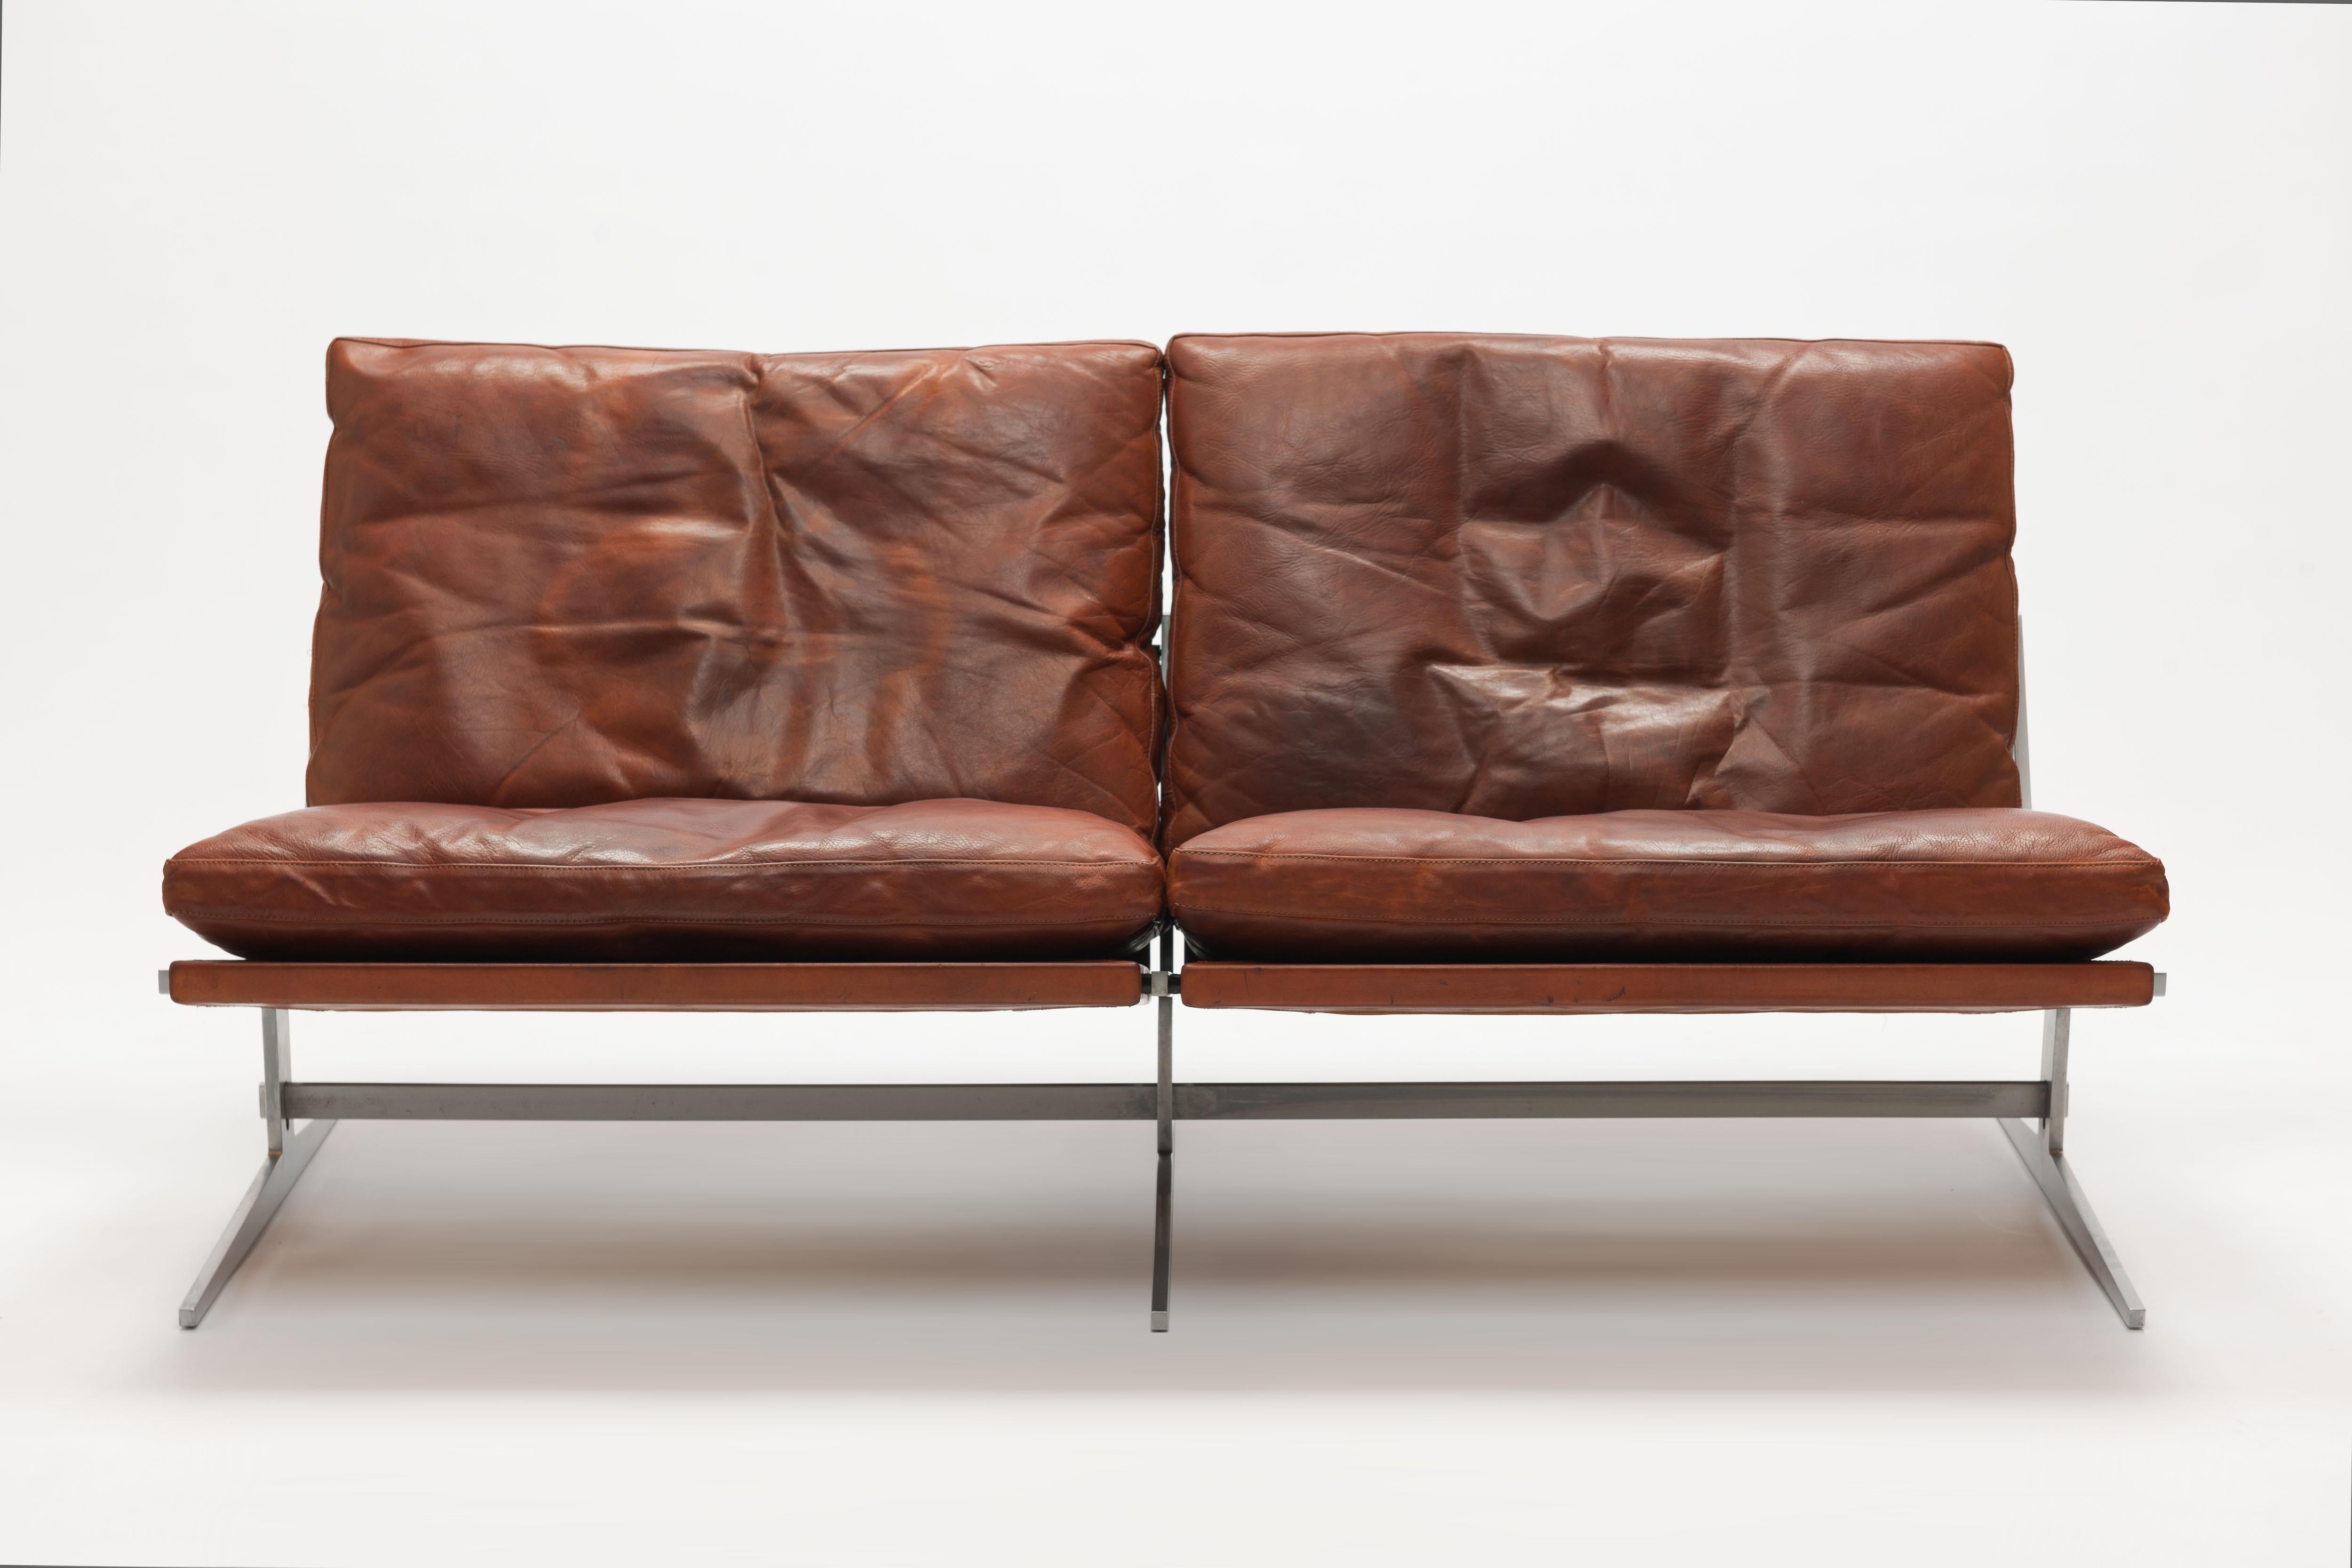 Beautiful cognac leather sofa model BO-562 by Danish designers Jørgen Kastholm & Preben Fabricius, executed mid 1960s by BO-Ex Denmark. 
A mayor comfortable design, due to the down filled cushions, with great sharp lines and a striking base. Very